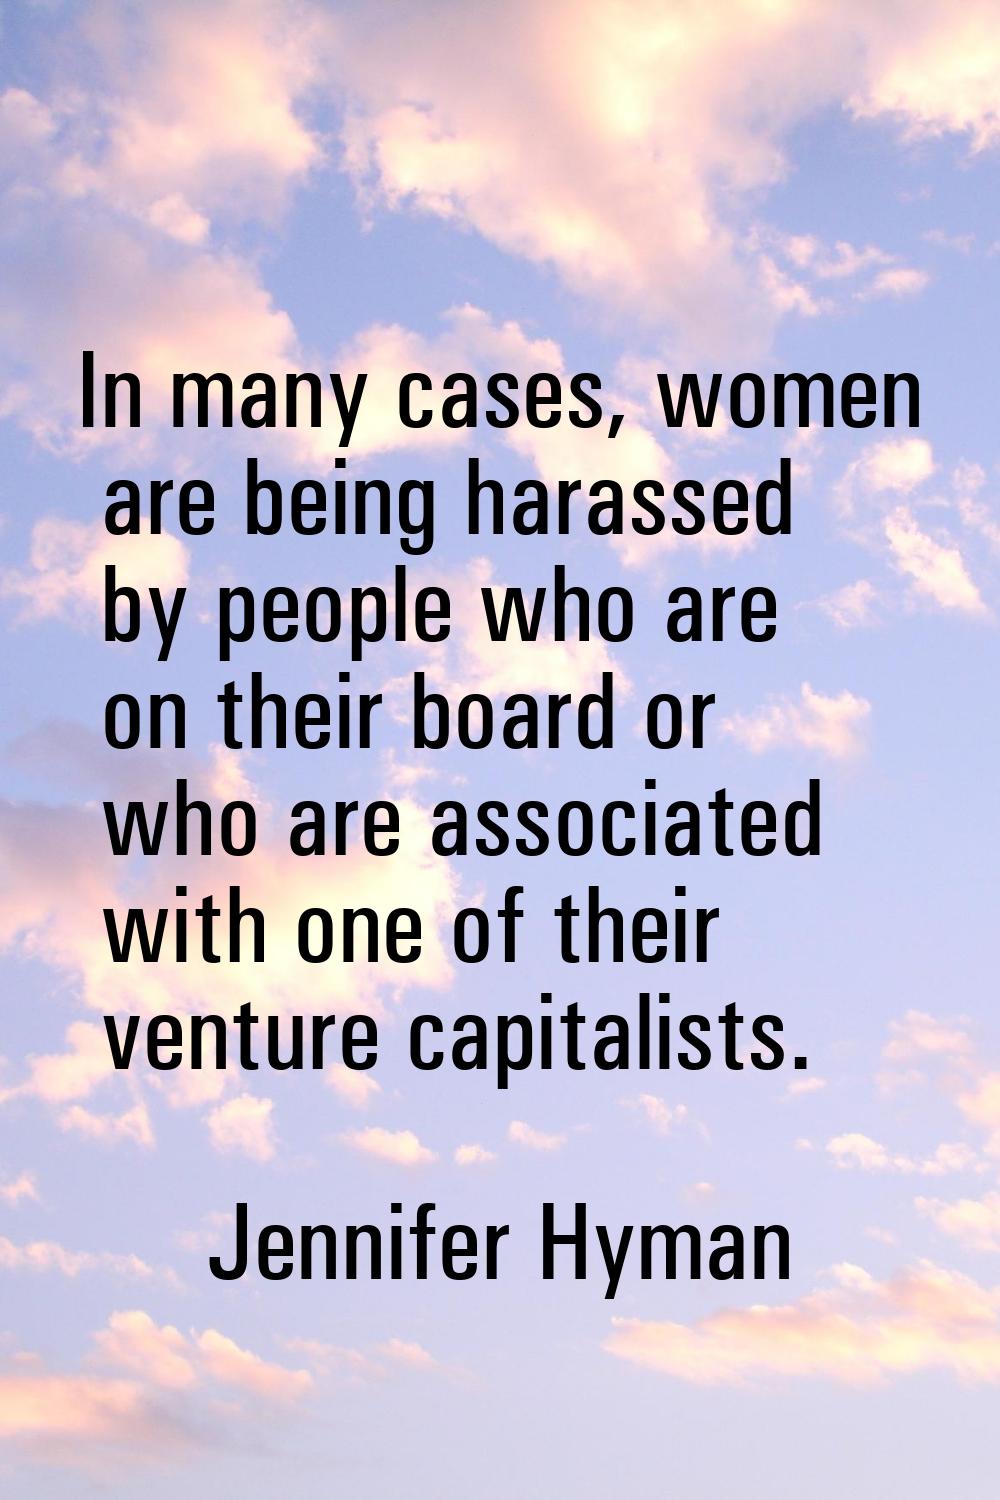 In many cases, women are being harassed by people who are on their board or who are associated with